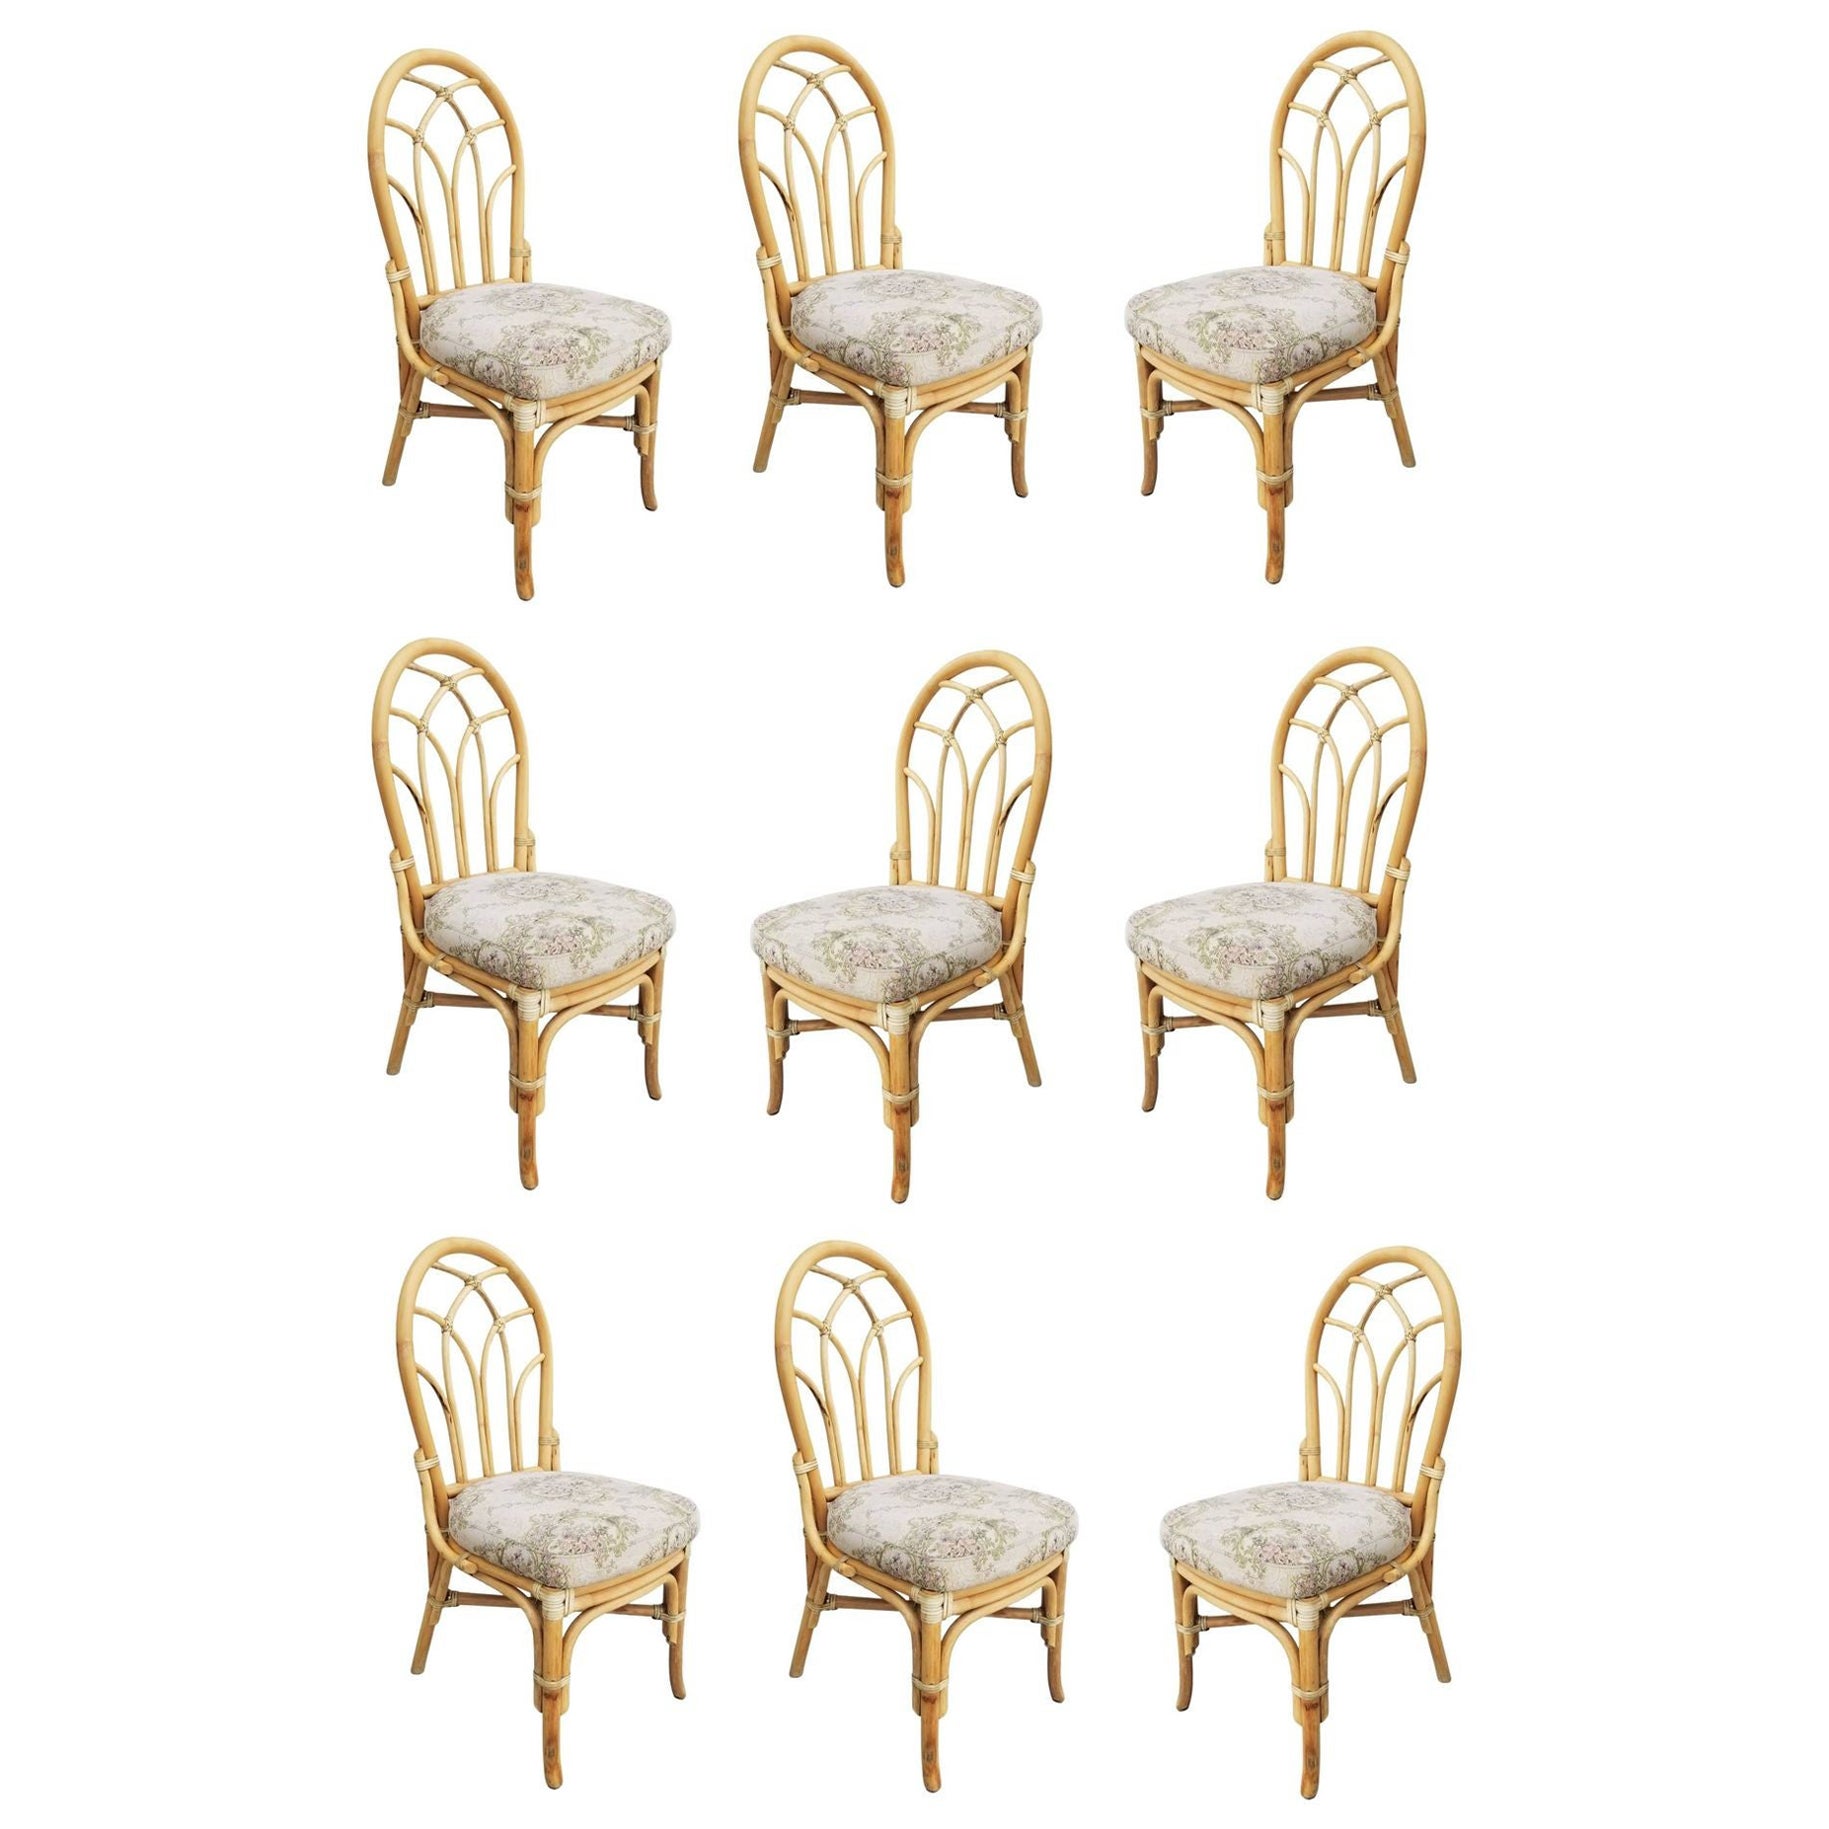 Restored Midcentury 3 Strand Rattan Floral Back Dining Chairs, Set of 9